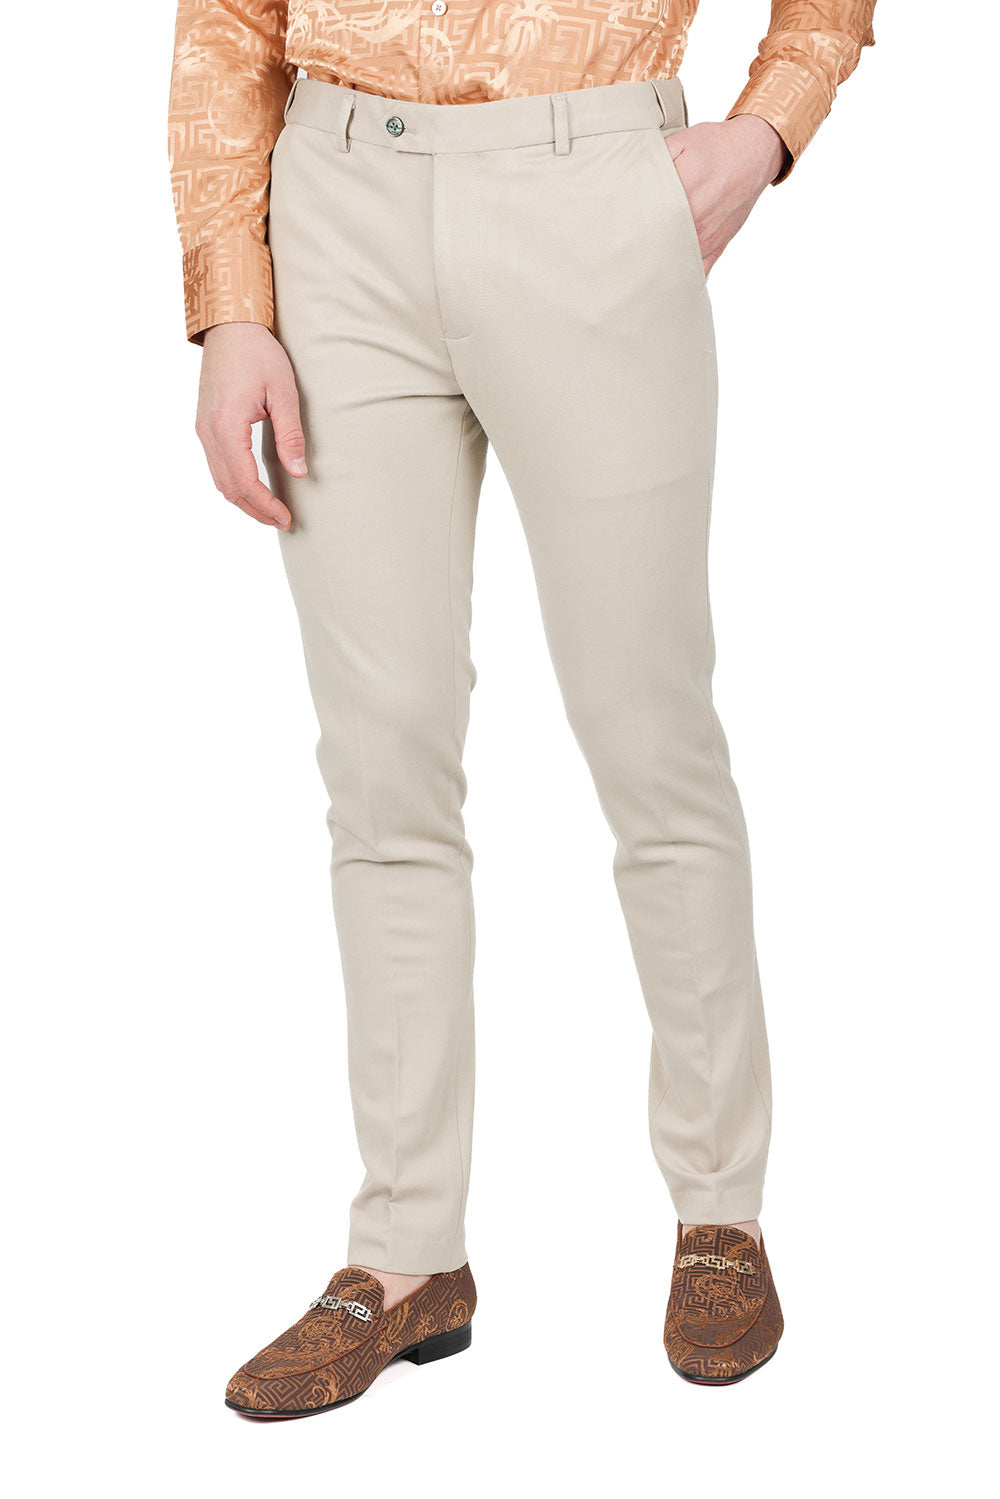 Barabas Men's Solid Color Essential Chino Dress Stretch Pants CP4007 Tan